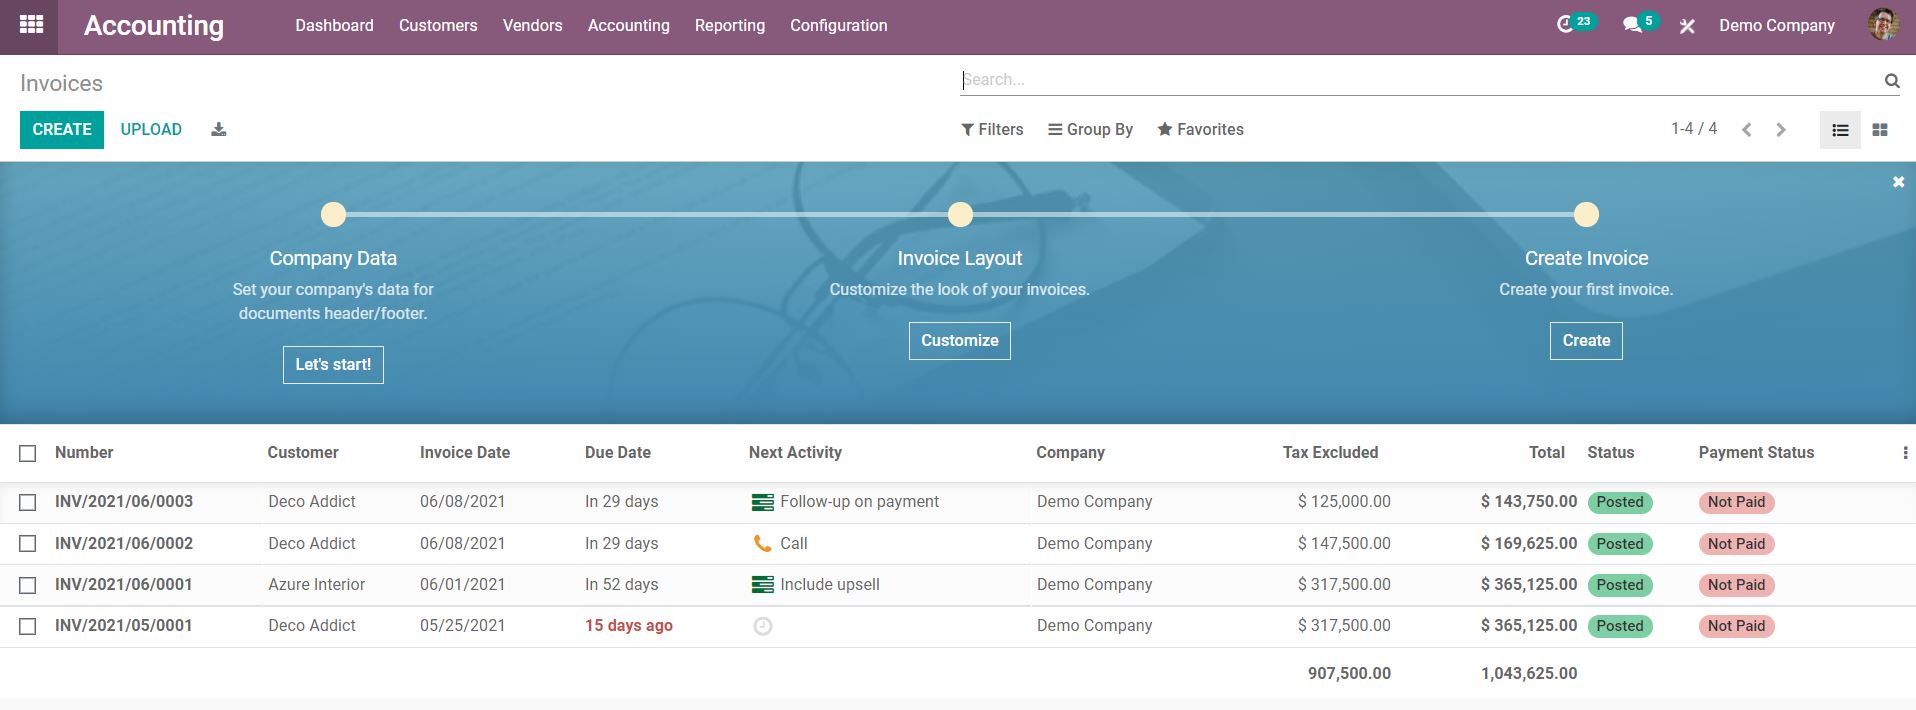 Odoo Accounting - Invoices